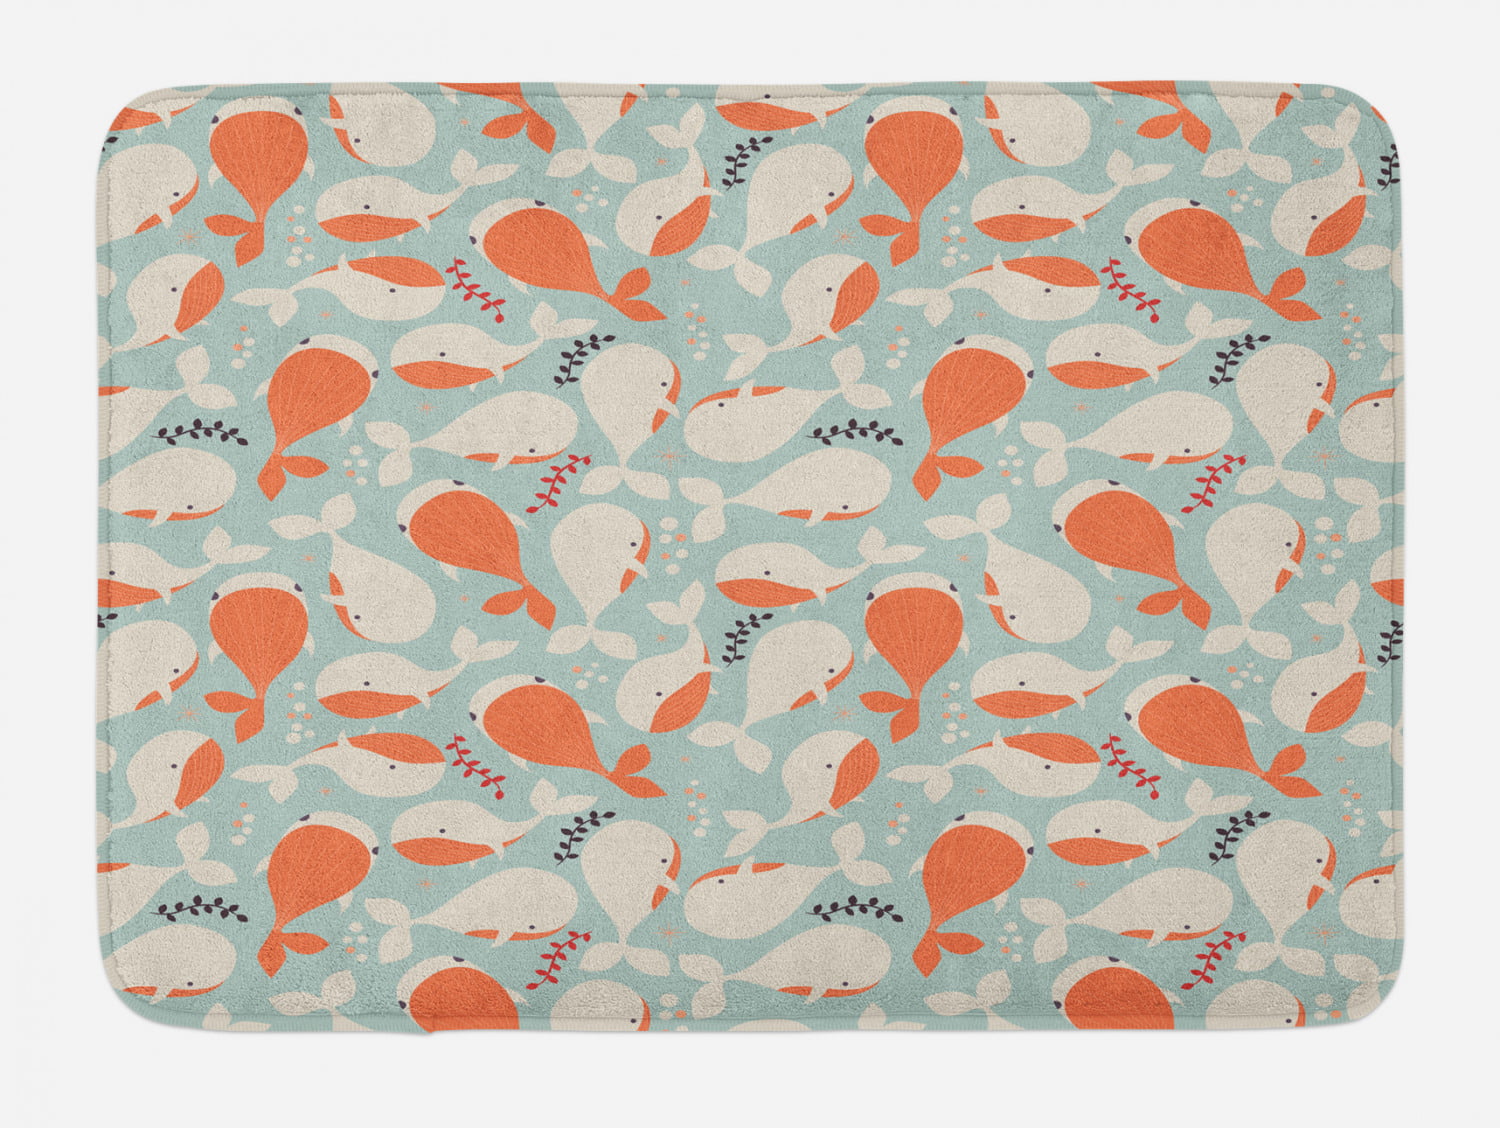 Navy Green 29.5 X 17.5 Ambesonne Cartoon Bath Mat Underwater Graphic Algaes Coral Reefs Turtles Fishes The Life Aquatic Plush Bathroom Decor Mat with Non Slip Backing 